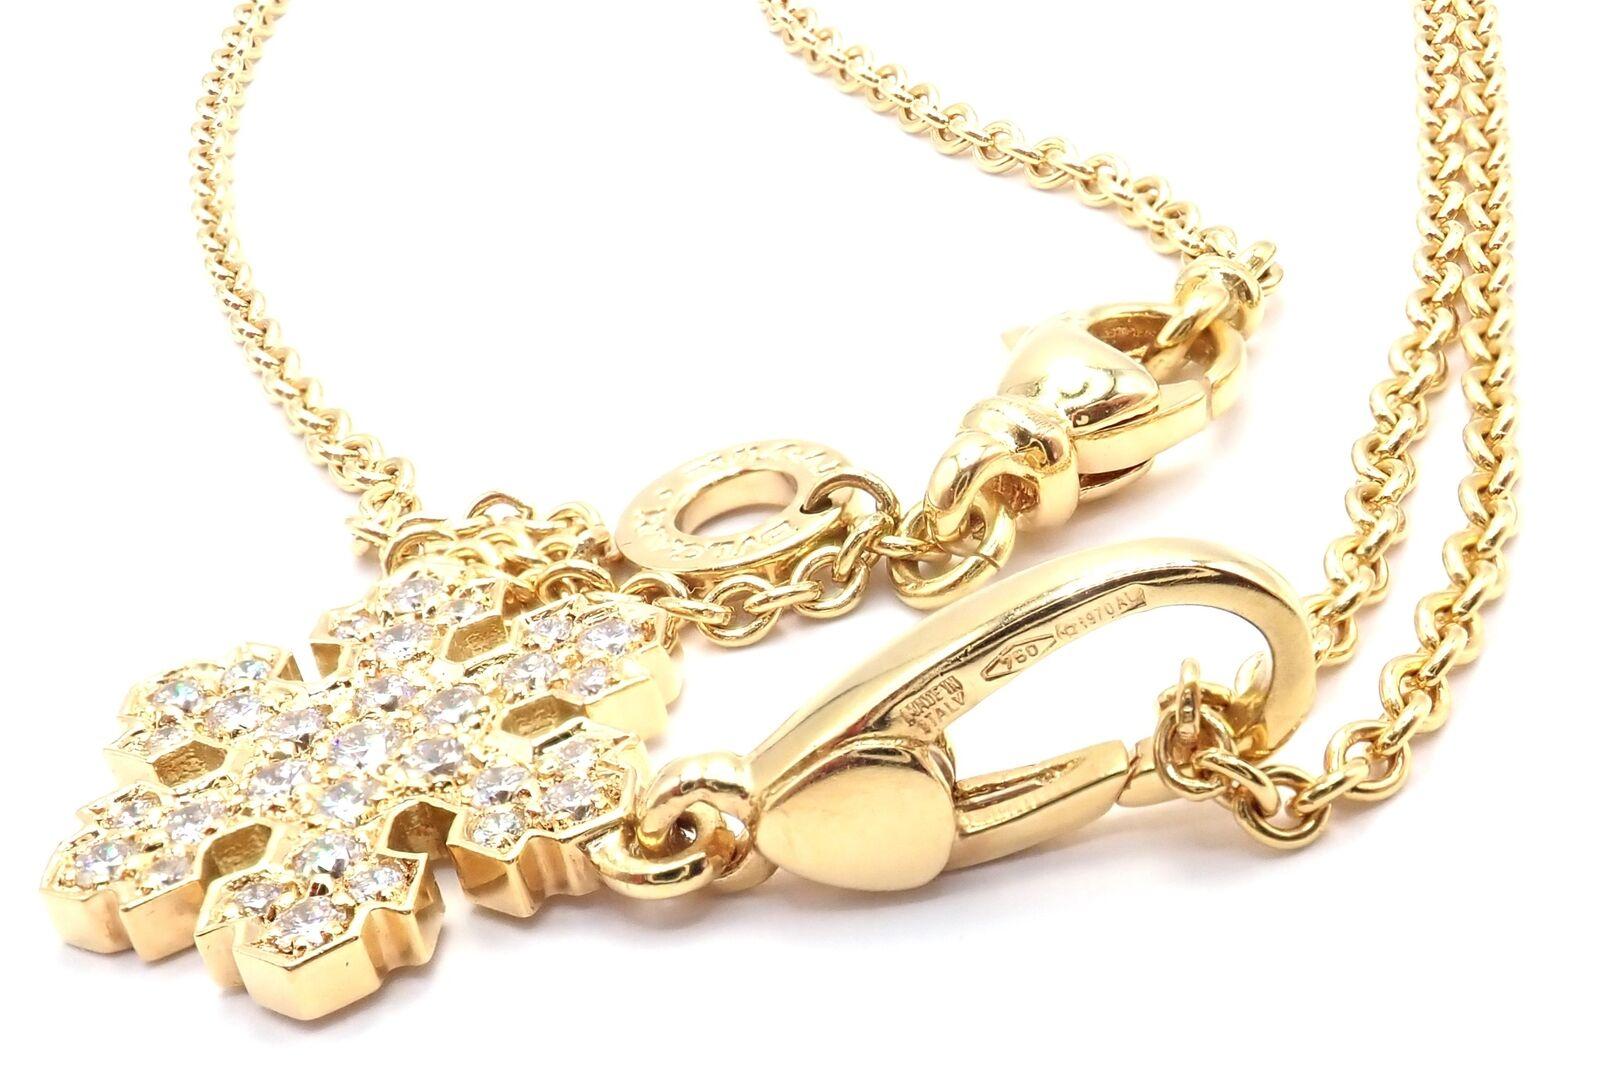 Bulgari Fiocco di Neve Snowflake Diamond Yellow Gold Pendant Necklace In Excellent Condition For Sale In Holland, PA